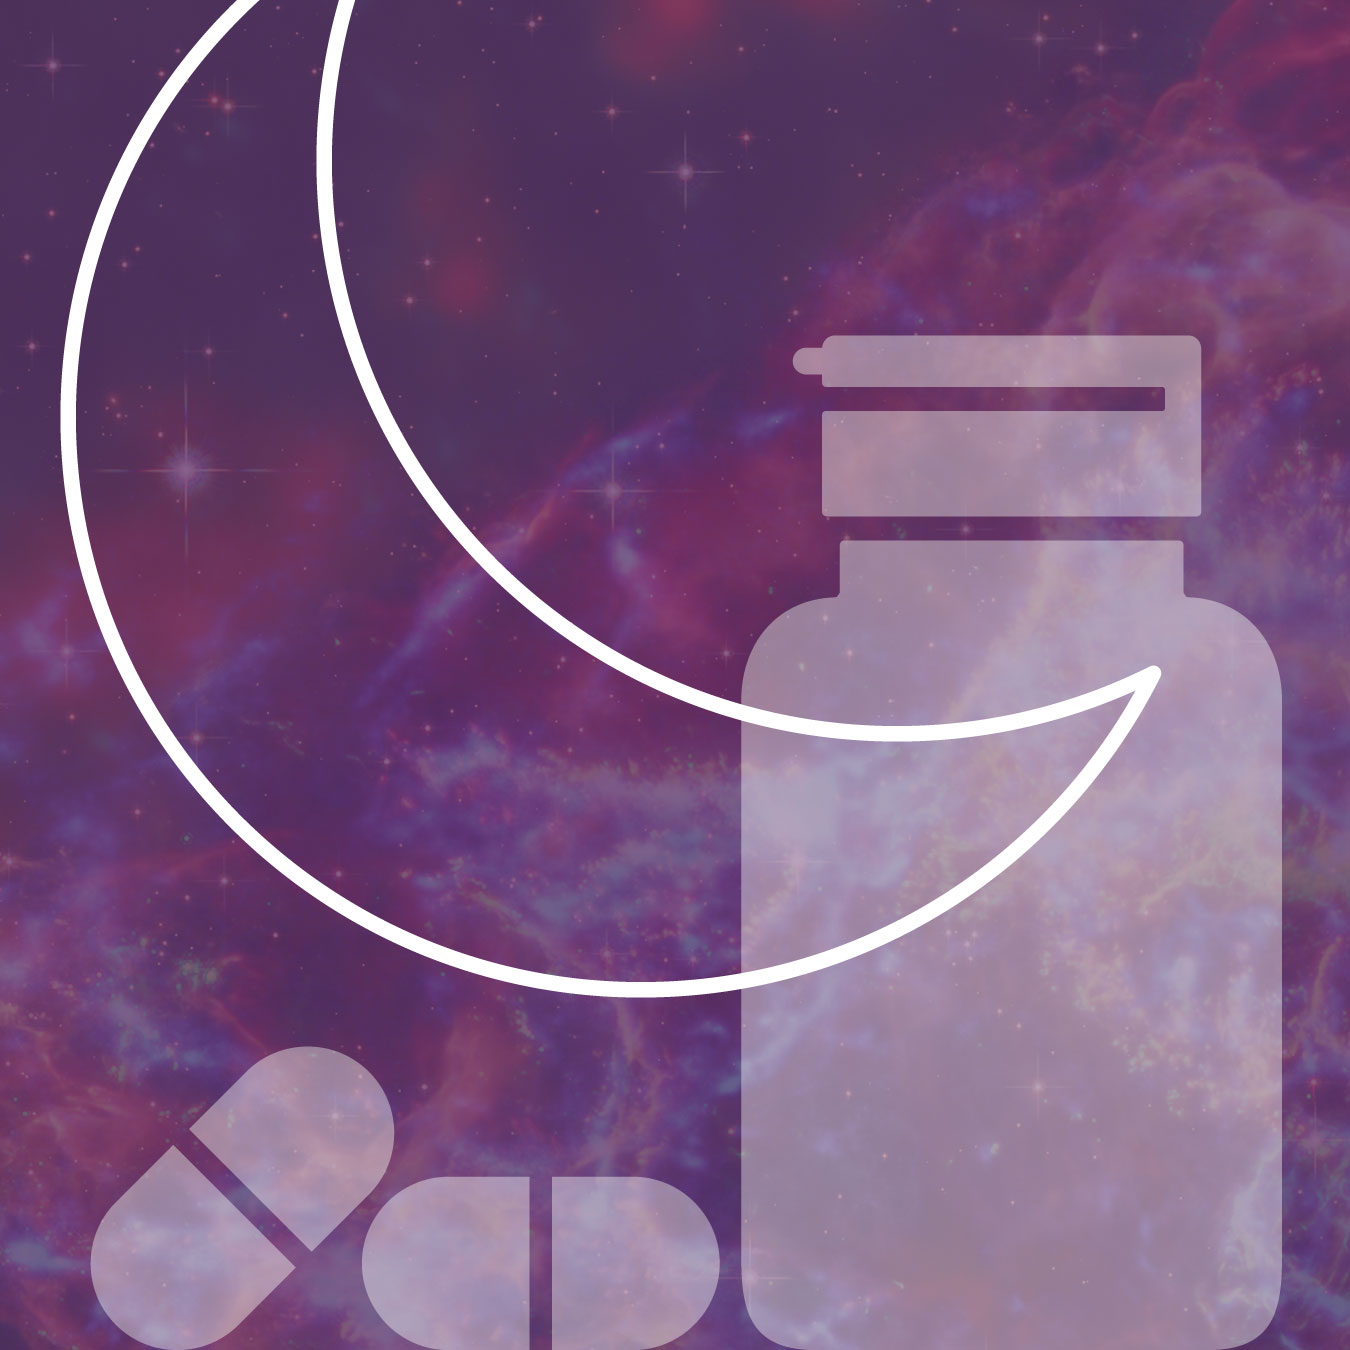 This image has a purple hue, with a crescent shaped moon. Along with a rectangular container in the bottom right and two pill capsules in the bottom left.  